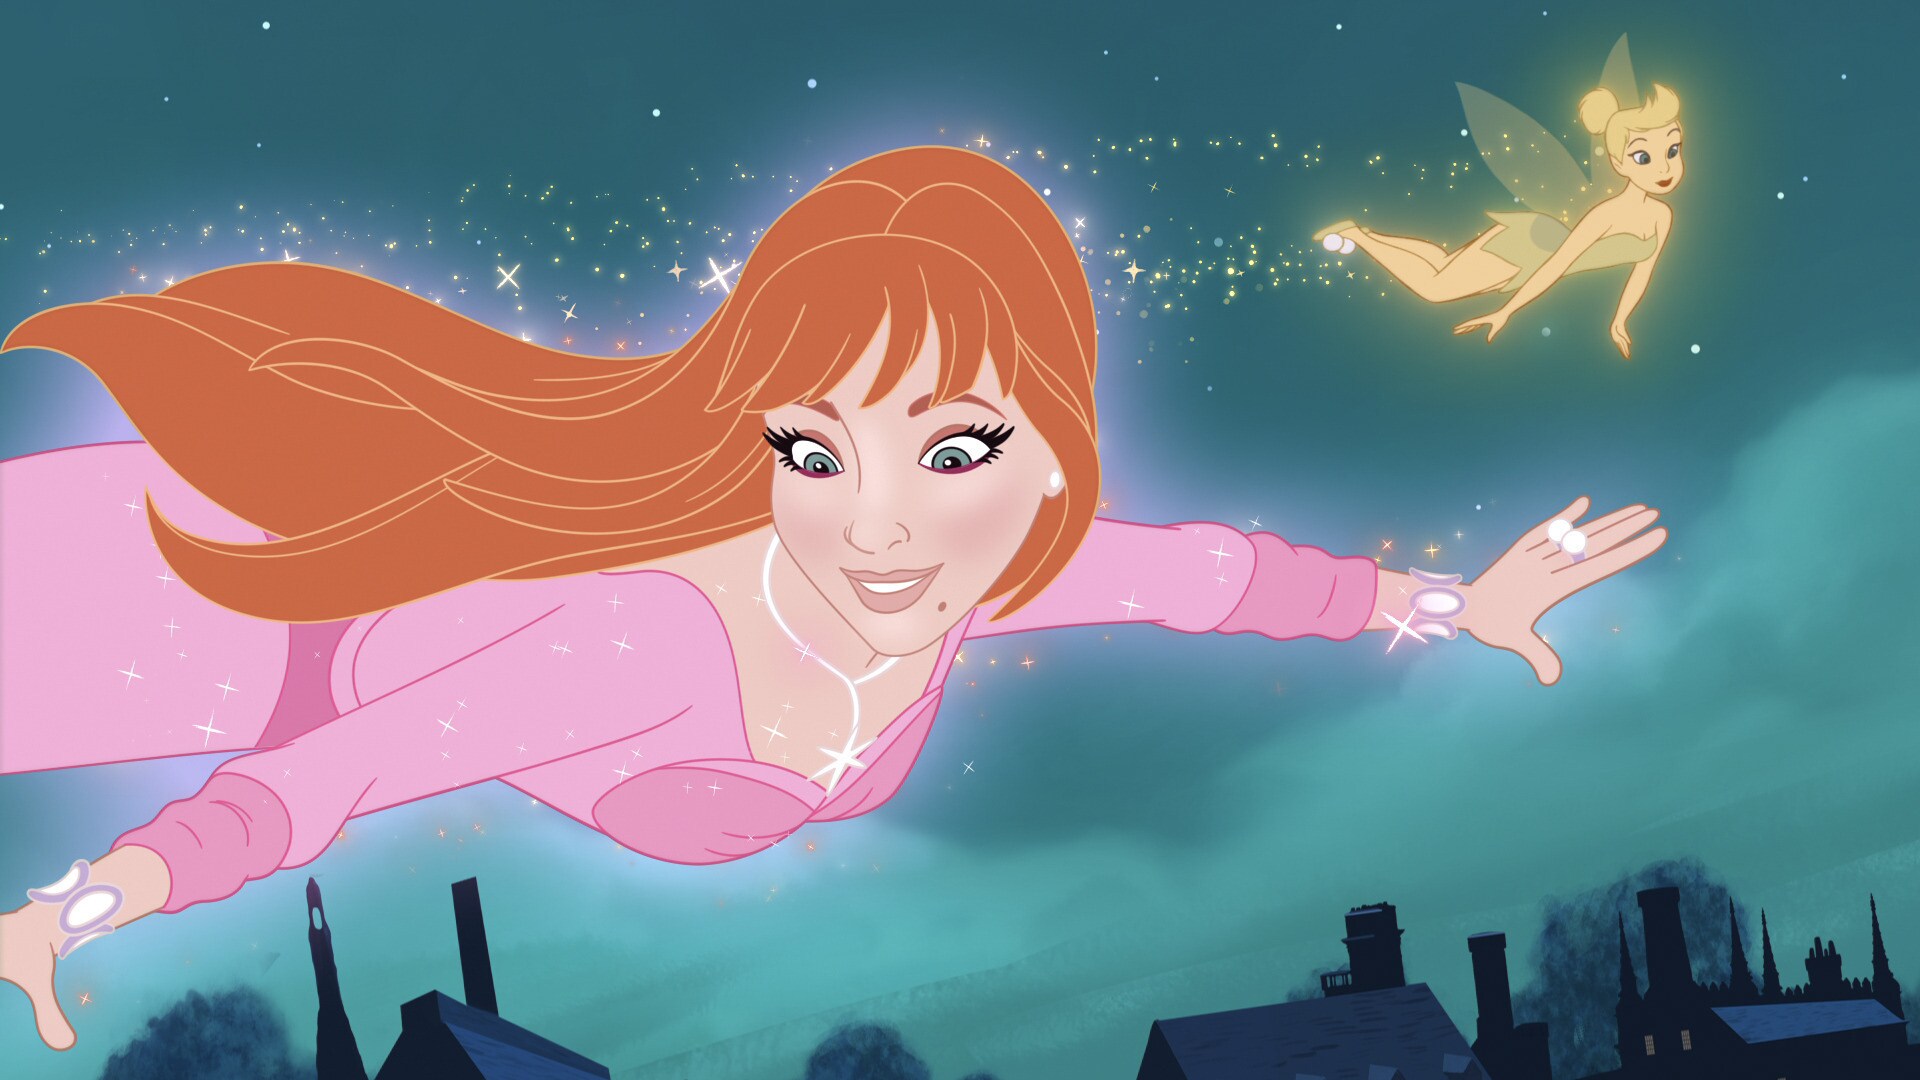 Charlotte Tilbury Lights Up The World And Makes Beauty Dreams Come True With New Disney Collection!